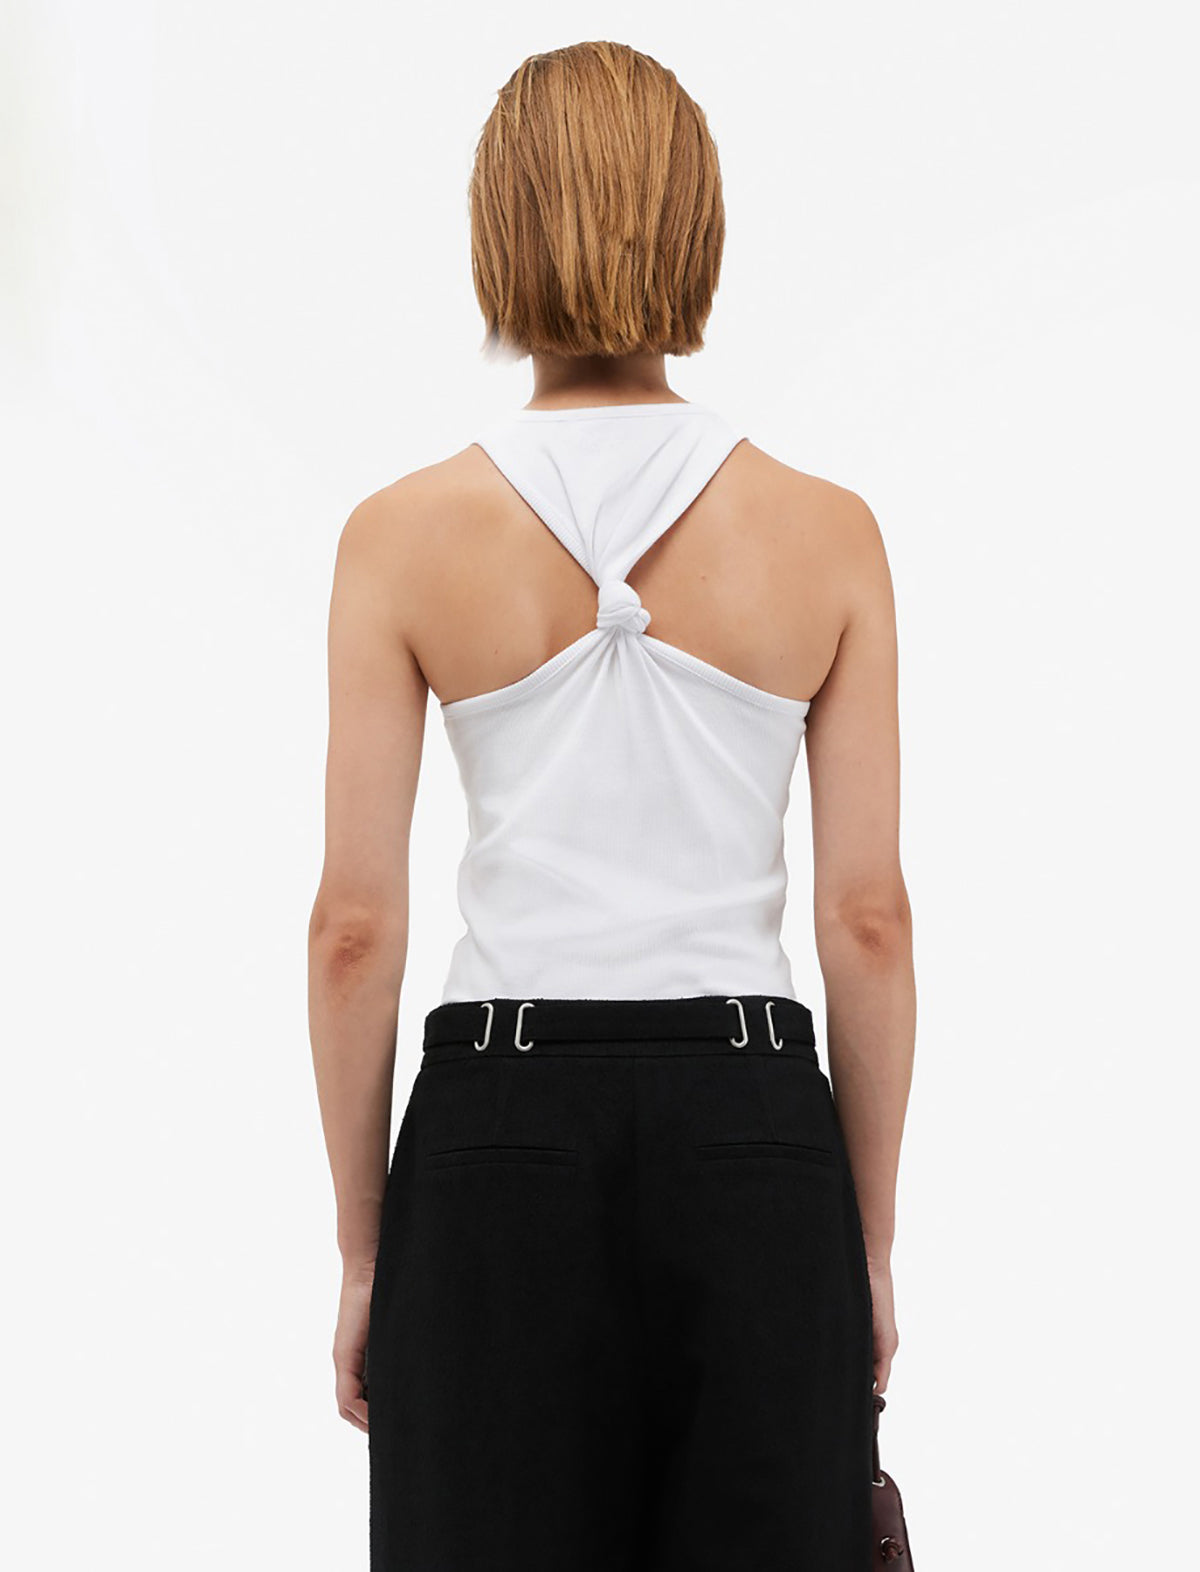 REMAIN Knotted Back Rib Top in Bright White